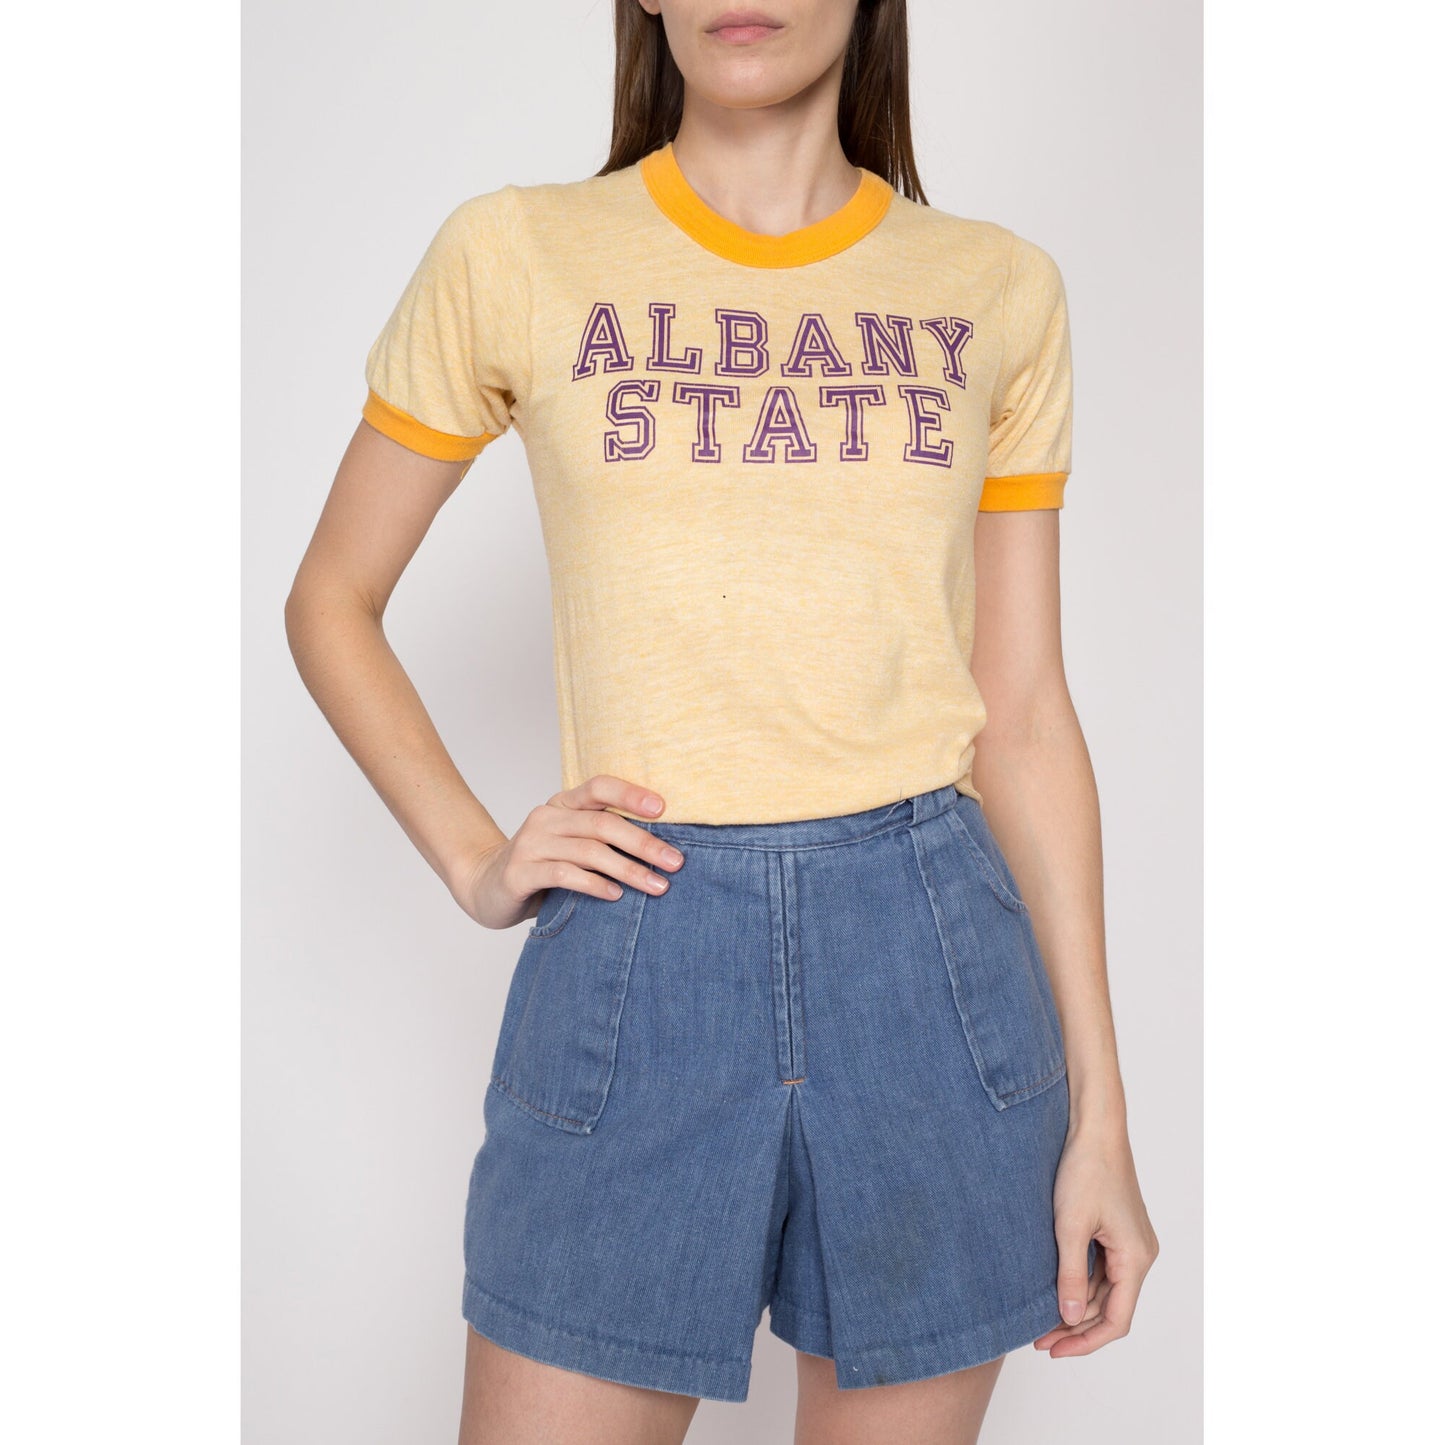 Small 80s Albany State Ringer T Shirt | Vintage Yellow Graphic University College Tee